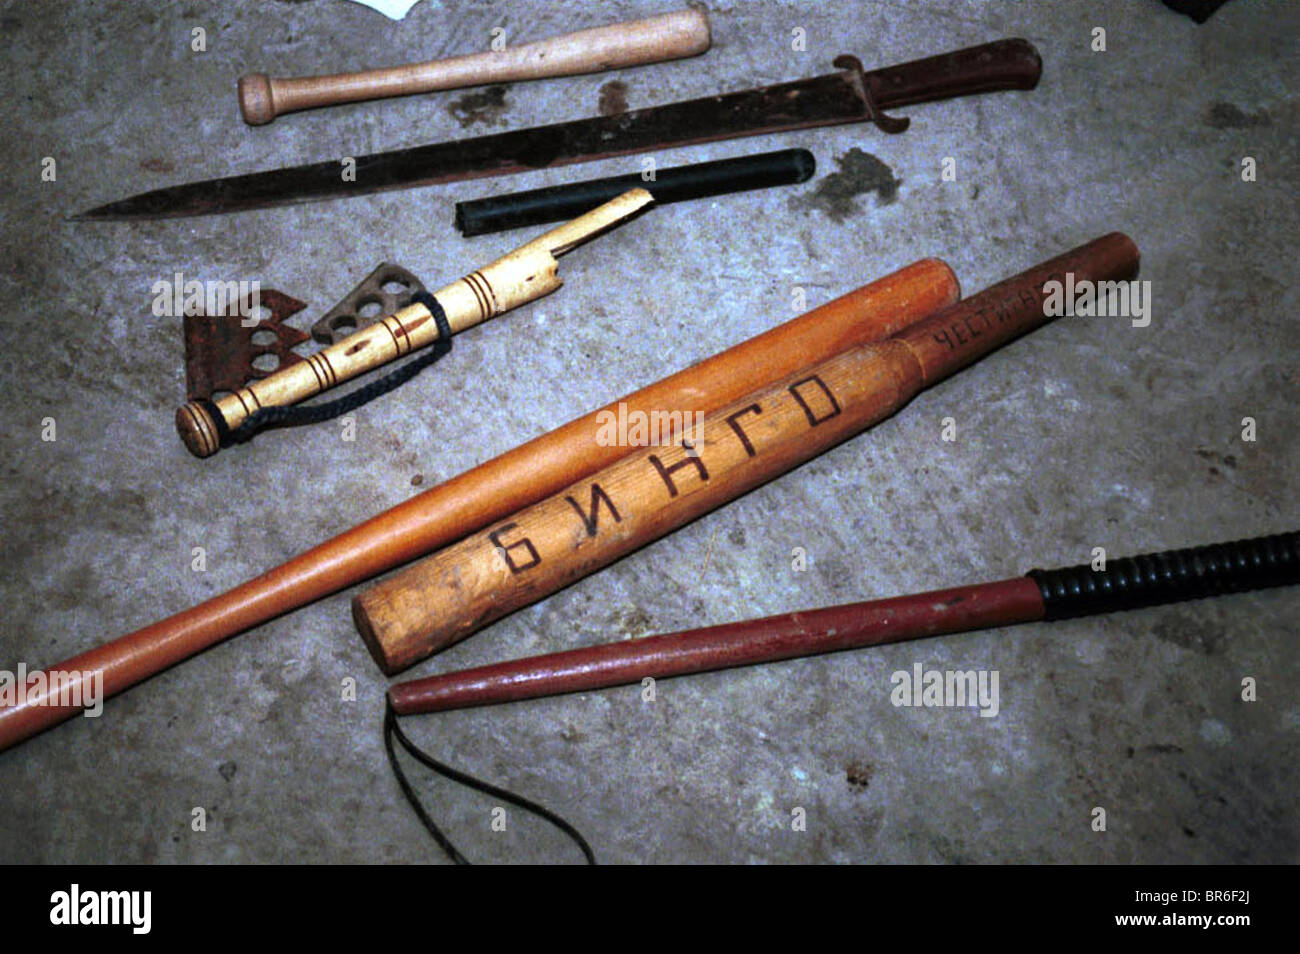 Torture weapons used at a police station torture chamber used by Serbian police in Pristina, Kosovo. Stock Photo